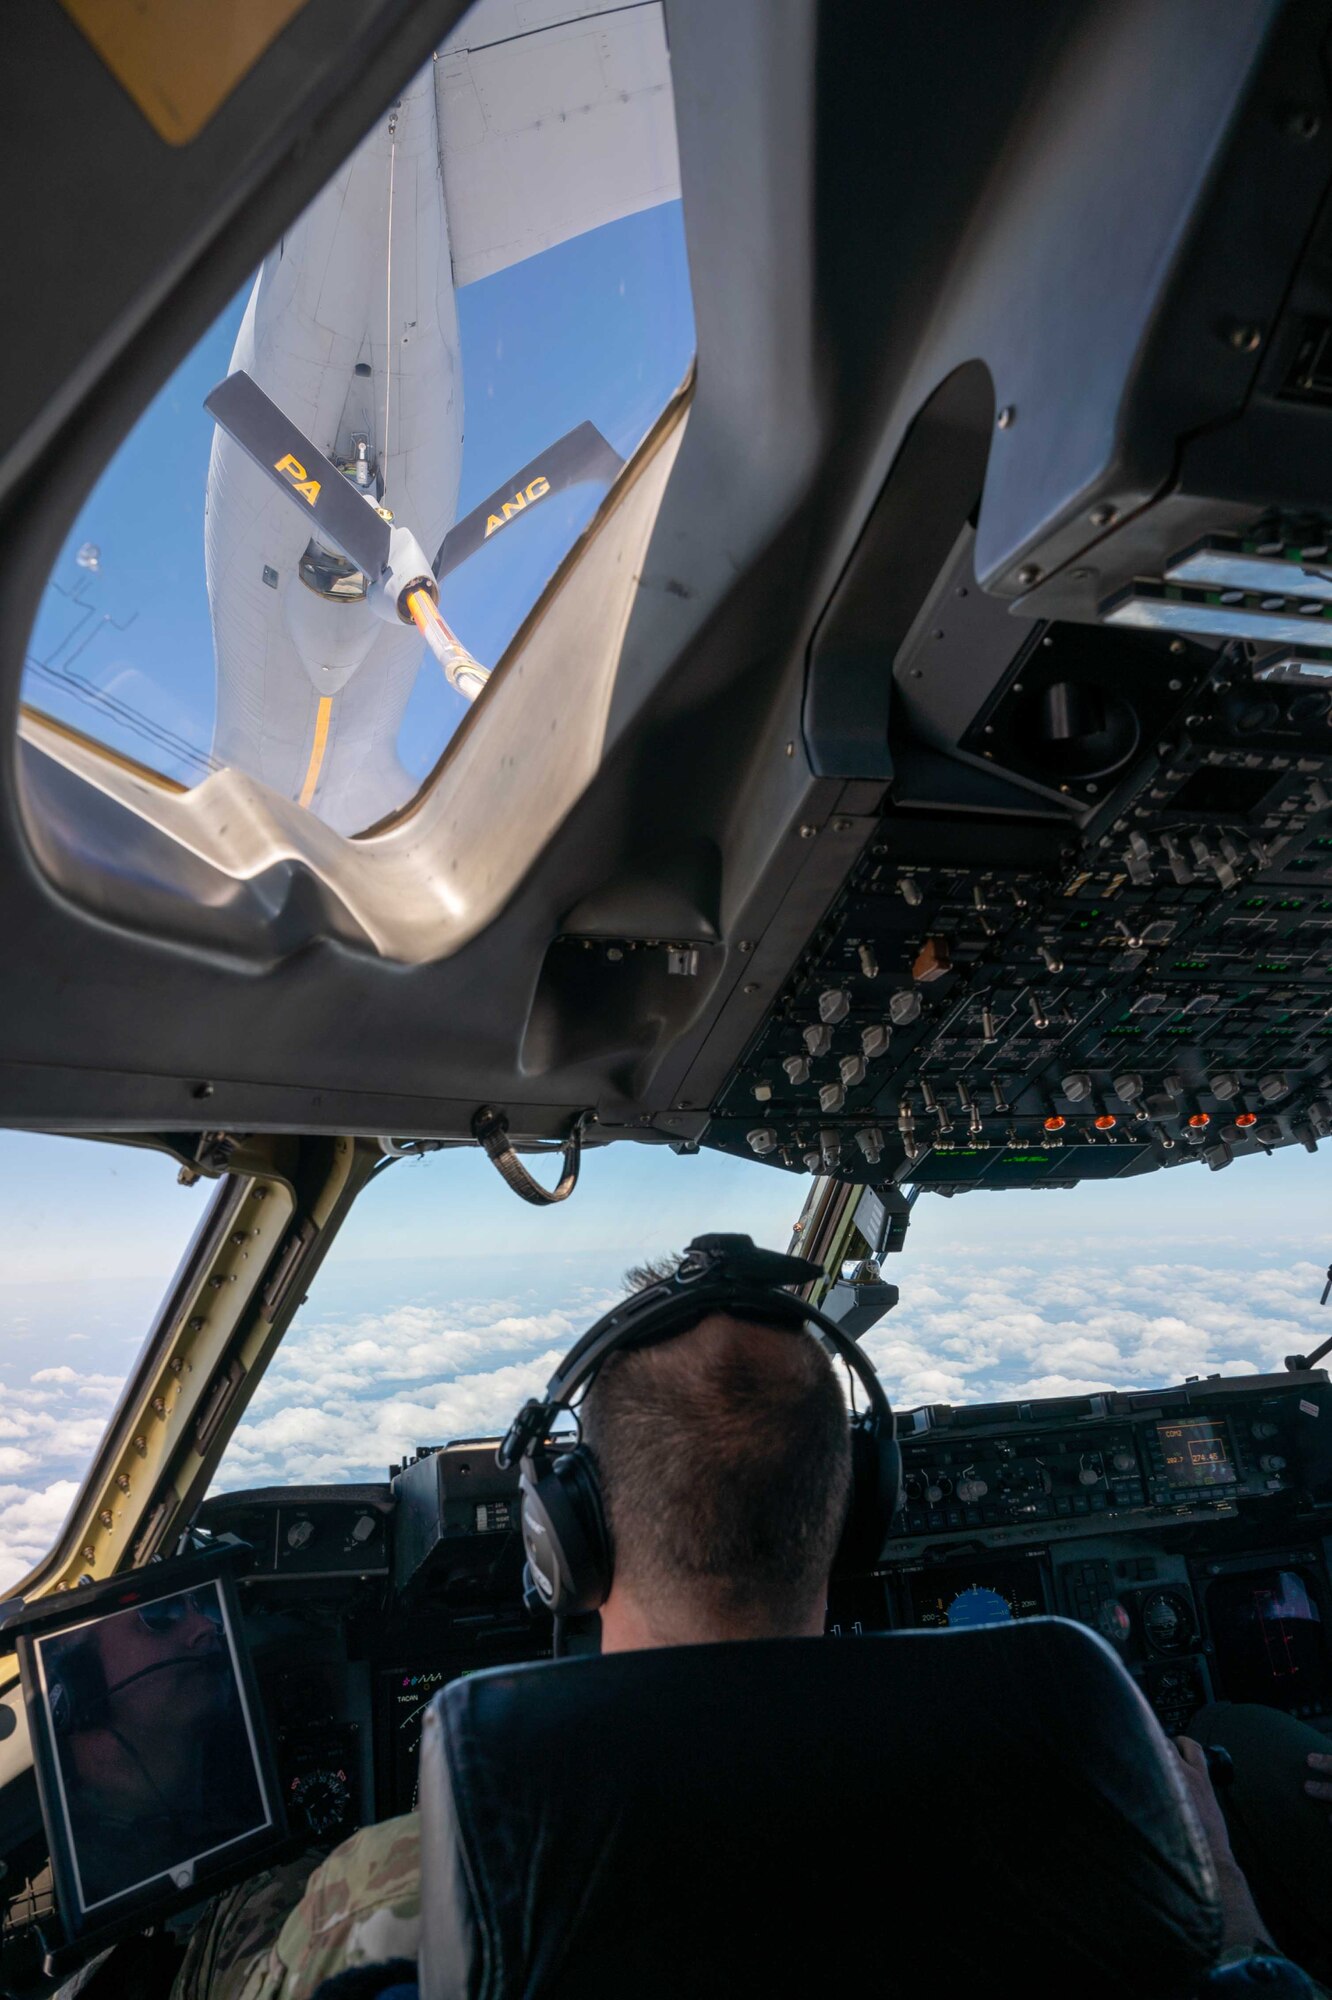 Maj. James Johnson, 3rd Airlift Squadron pilots, prepares a C-17 Globemaster III for an aerial refueling from a 171st Air Refueling Wing KC-135 Stratotanker, assigned to the  Pennsylvania Air National Guard, over Ohio, April 22, 2021. The 3rd AS trains to support global engagement through direct delivery of critical theater assets and to ensure combat readiness of Air Mobility Command C-17 aircrews. (U.S. Air Force photo by Airman 1st Class Faith Schaefer)